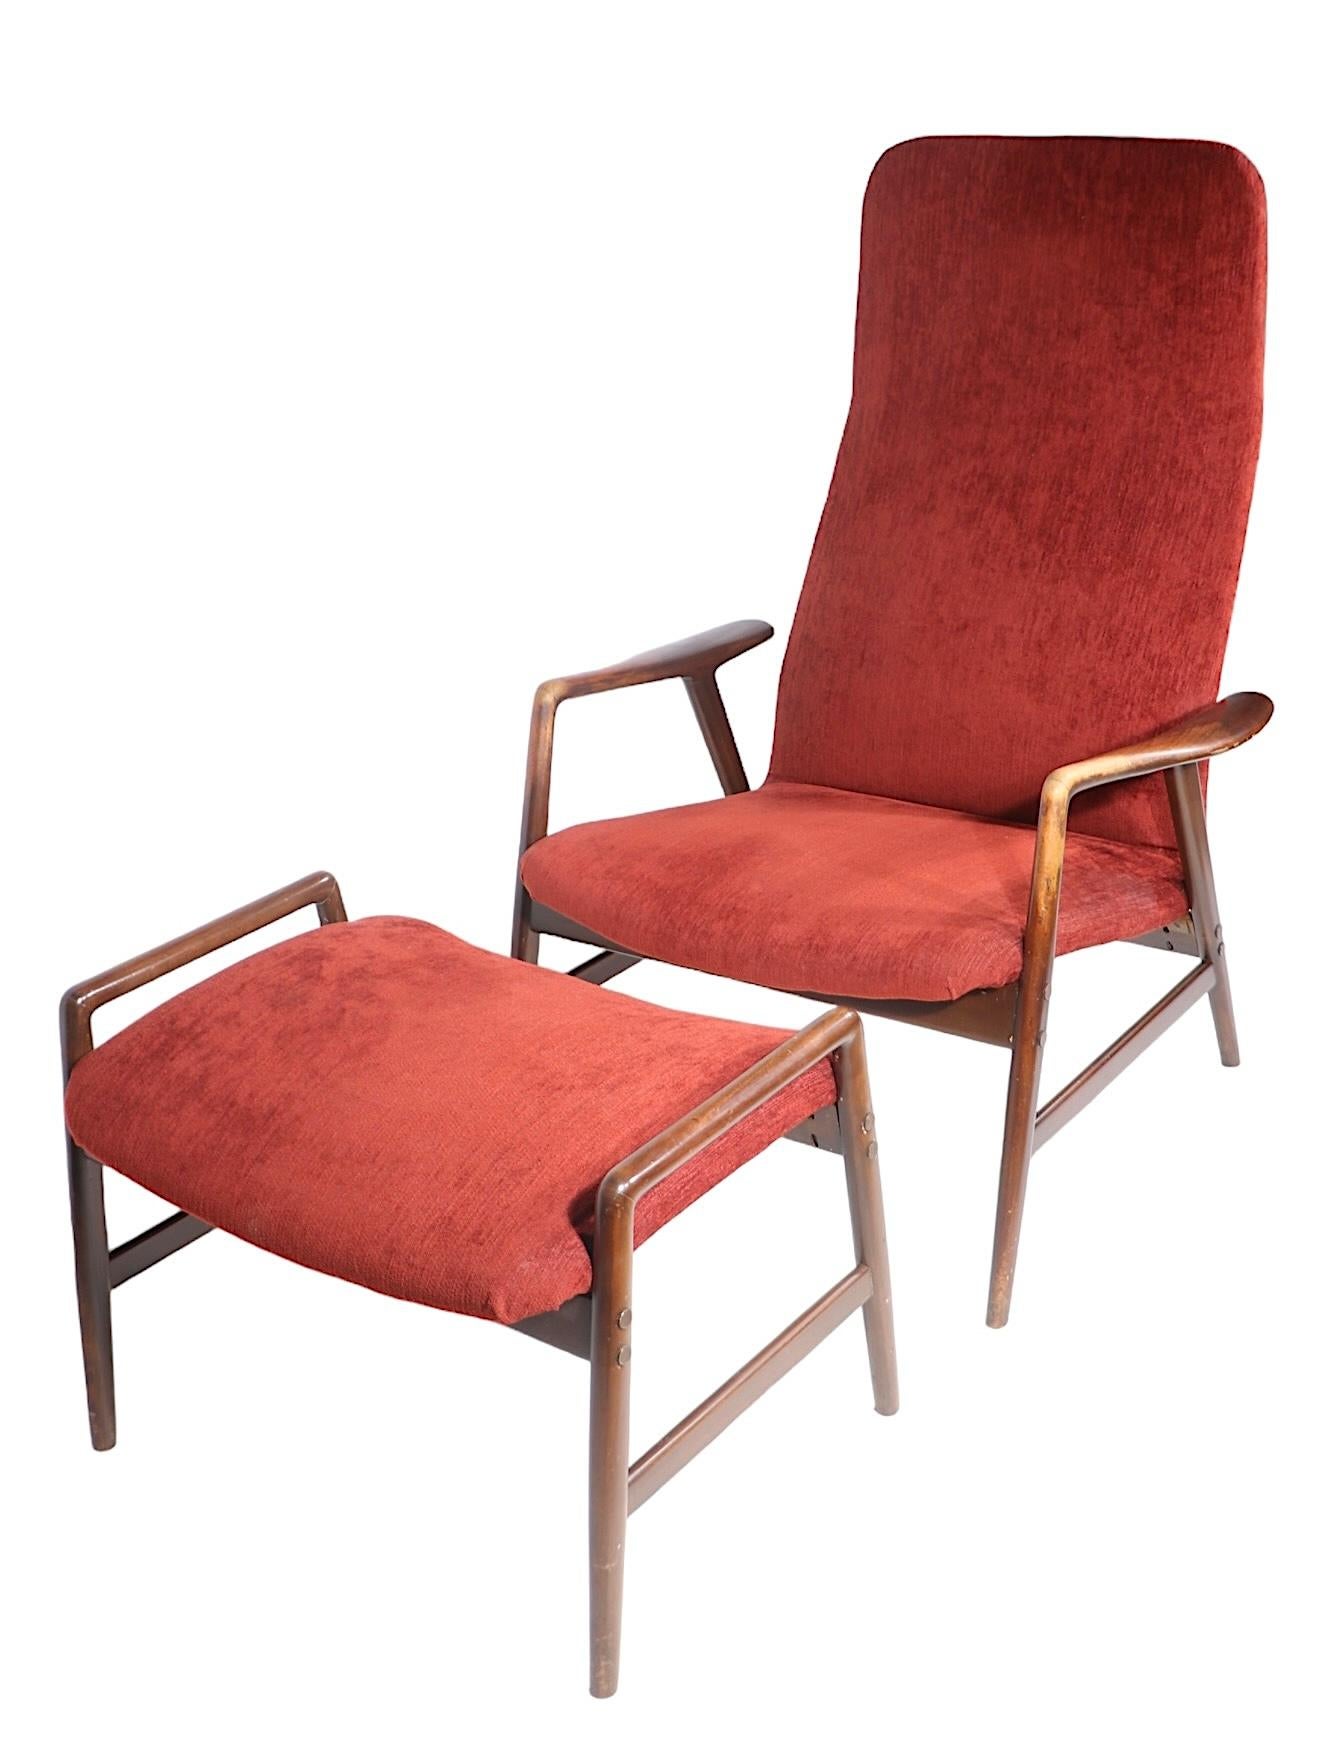 Mid Century Lounge Chair and Ottoman by Alf Svensson for Fritz Hansen c. 1960's For Sale 9